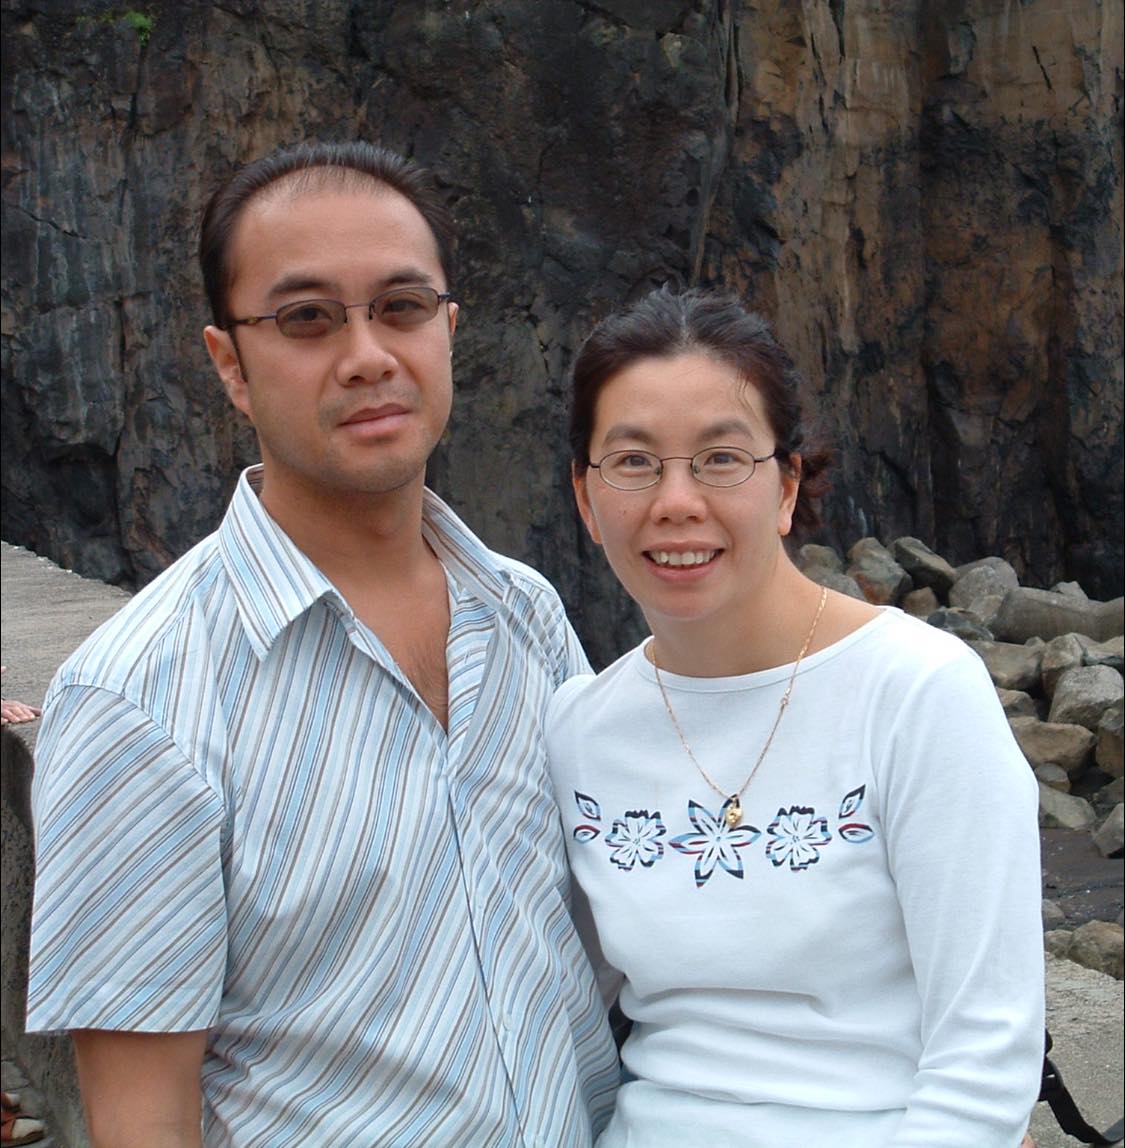 Gordon and Angela Fong on holiday in Madeira